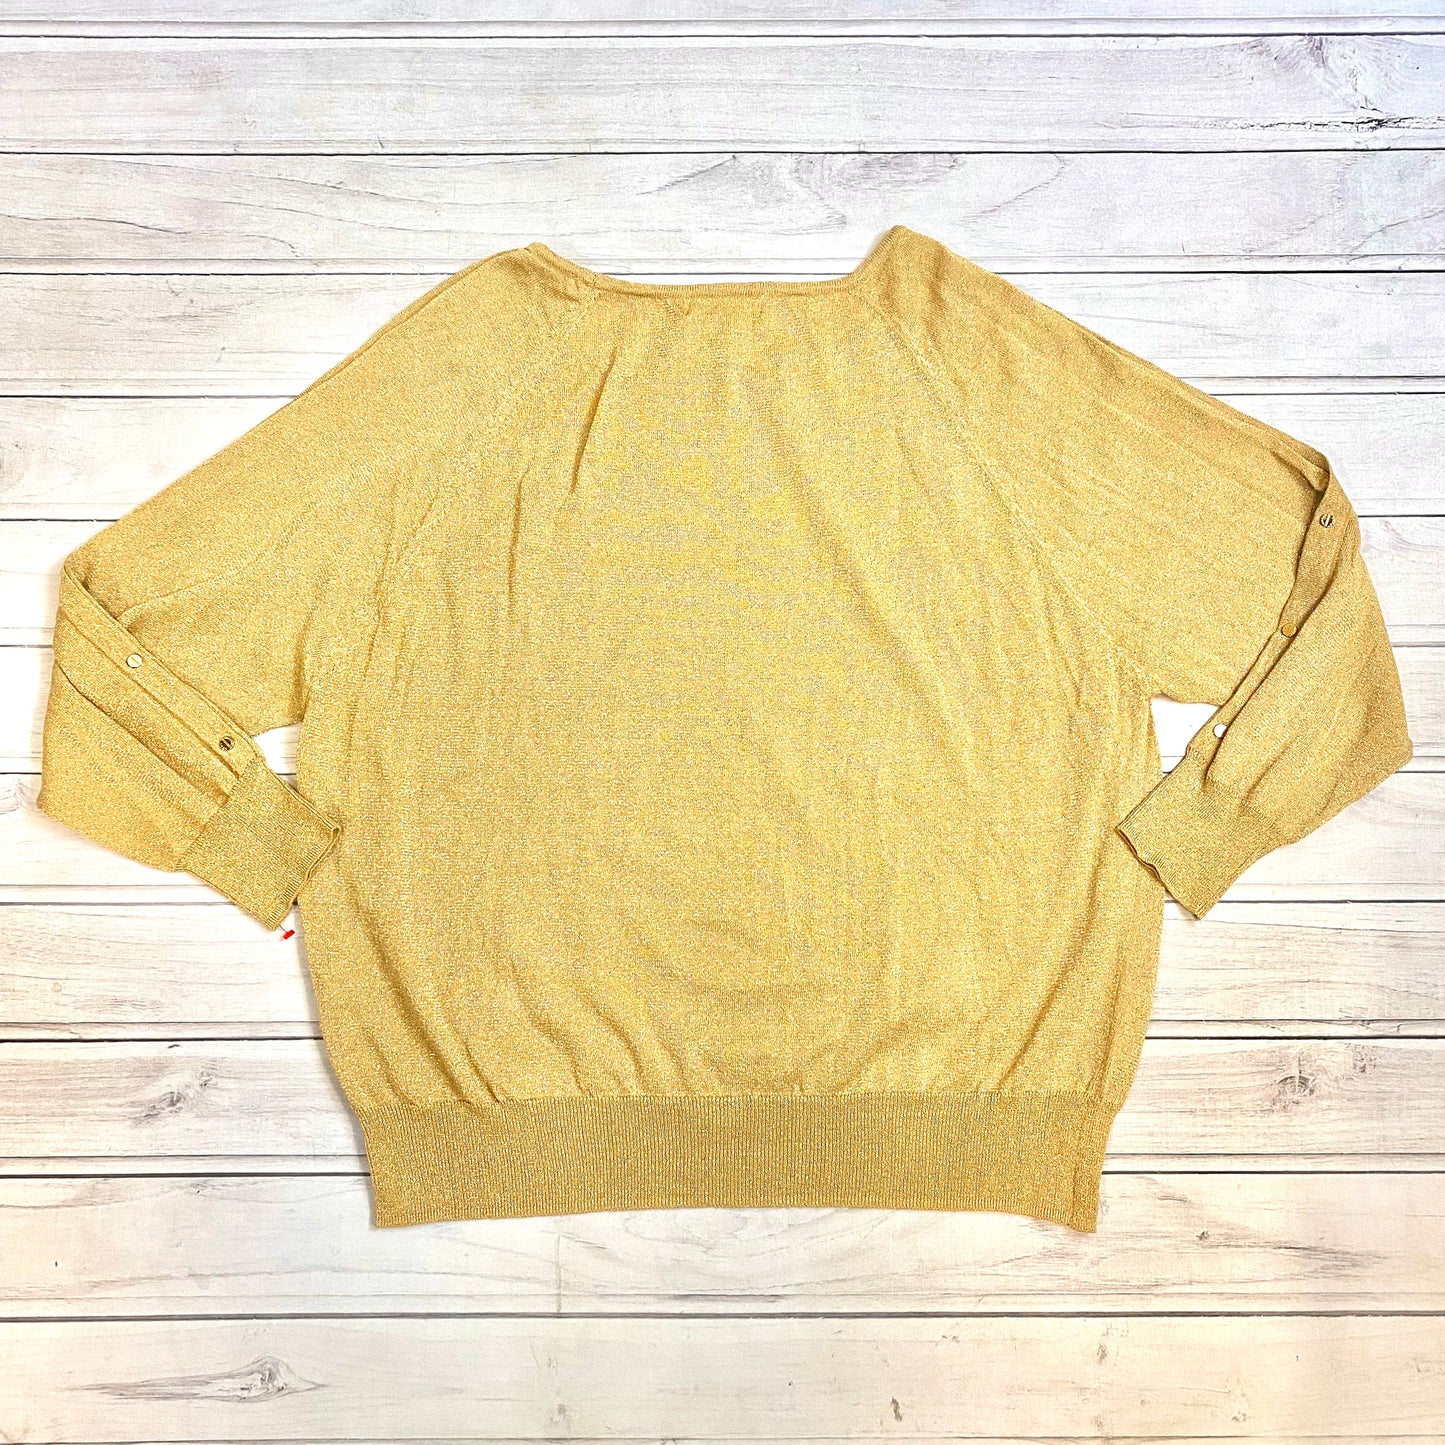 Sweater By Michael By Michael Kors  Size: 3x